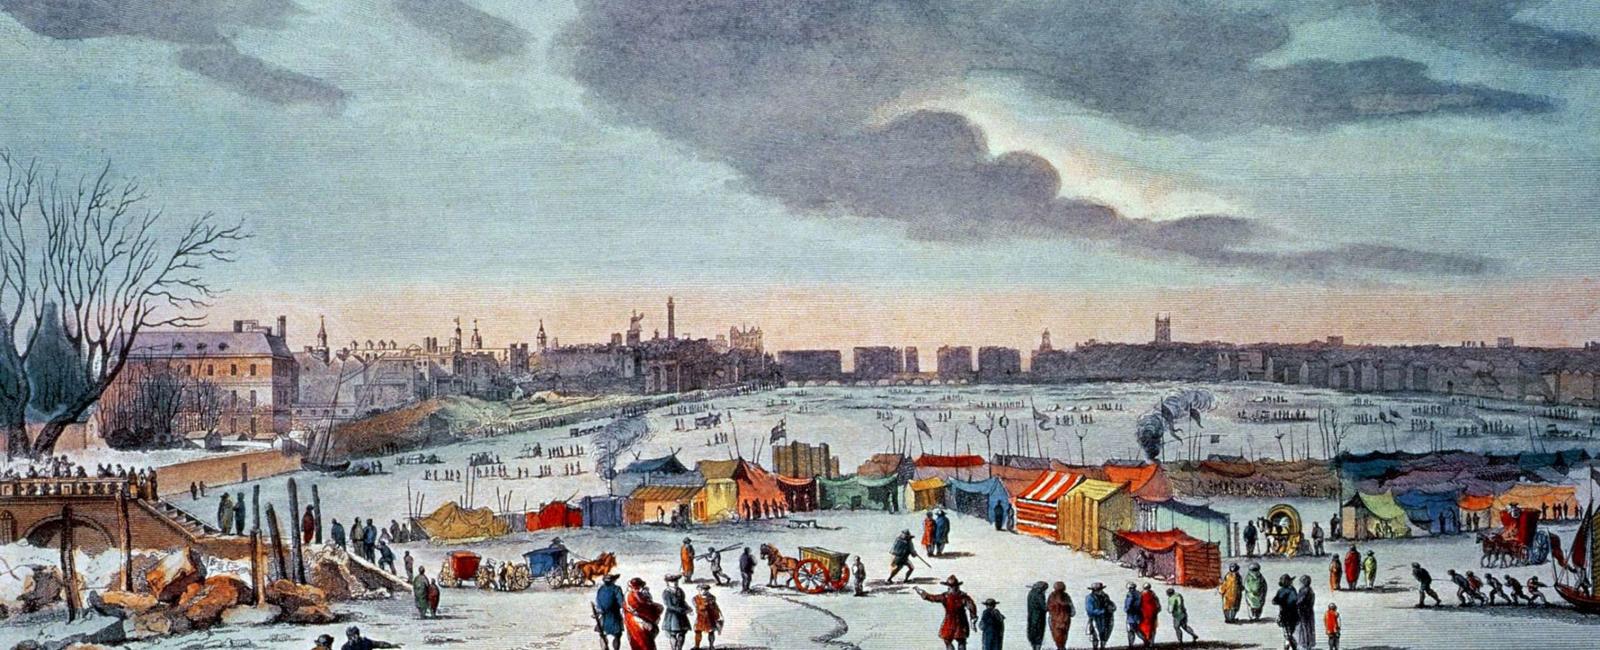 It was so cold in 1684 that the thames river in england froze solid for two months